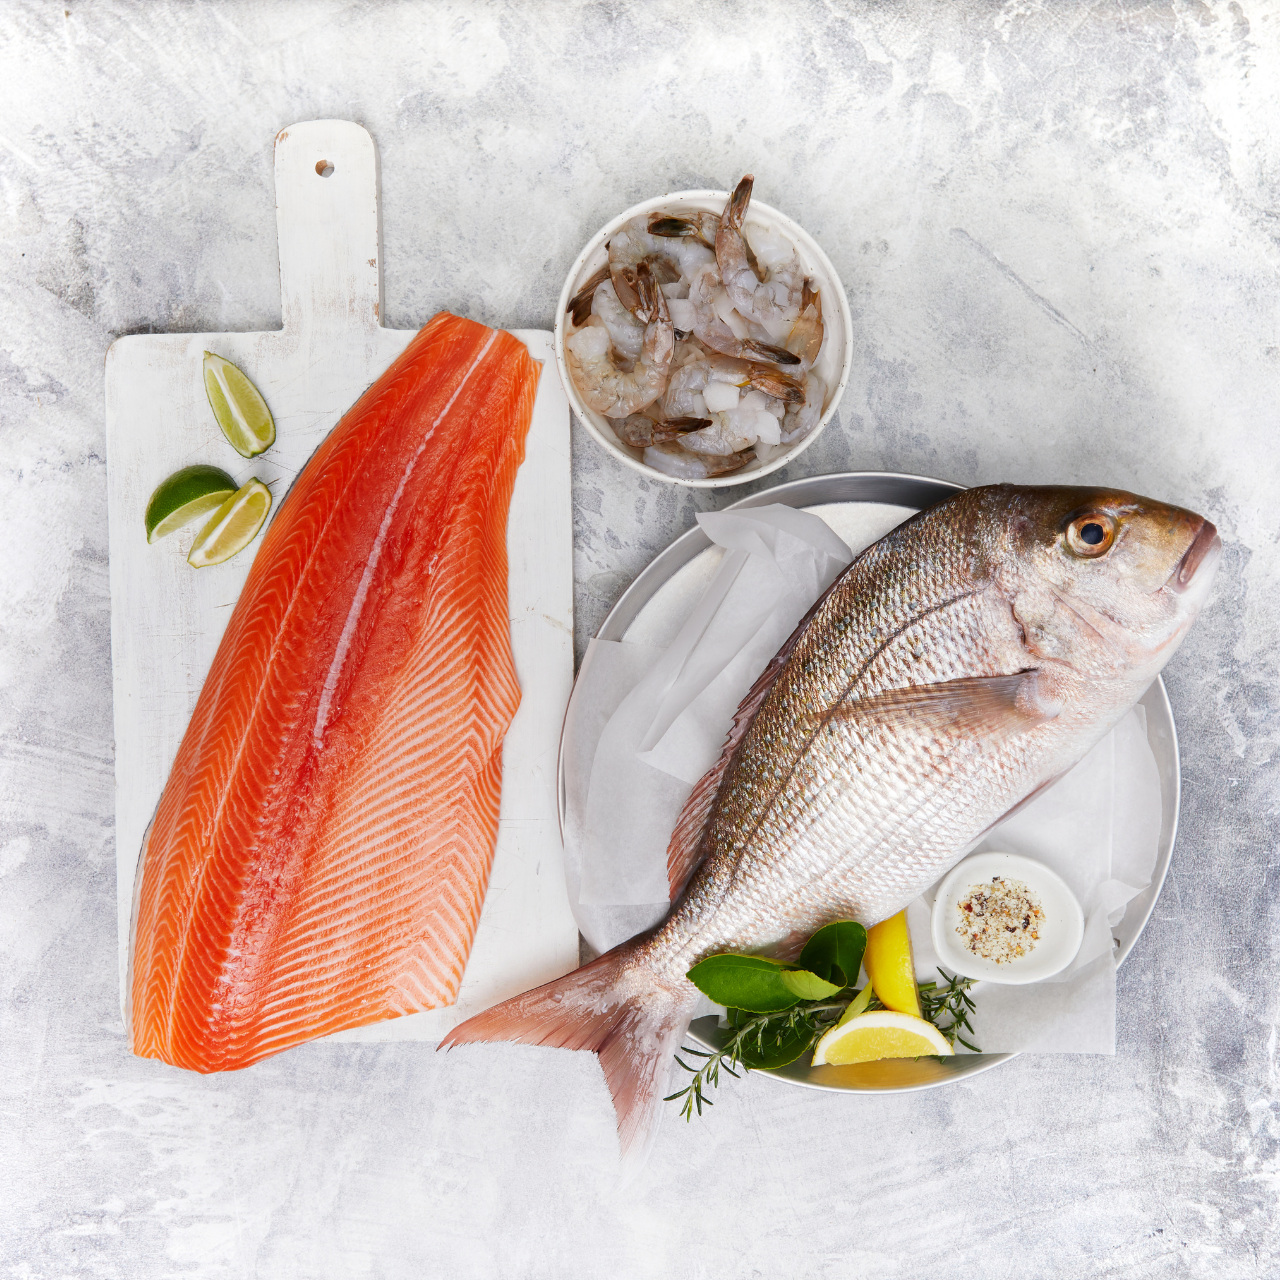 Buy Sanford and Sons new Seafood Box delivered to your door. Our entertainers delight box includes a Side of King Salmon, Whole Snapper fish and Prawn Cutlets